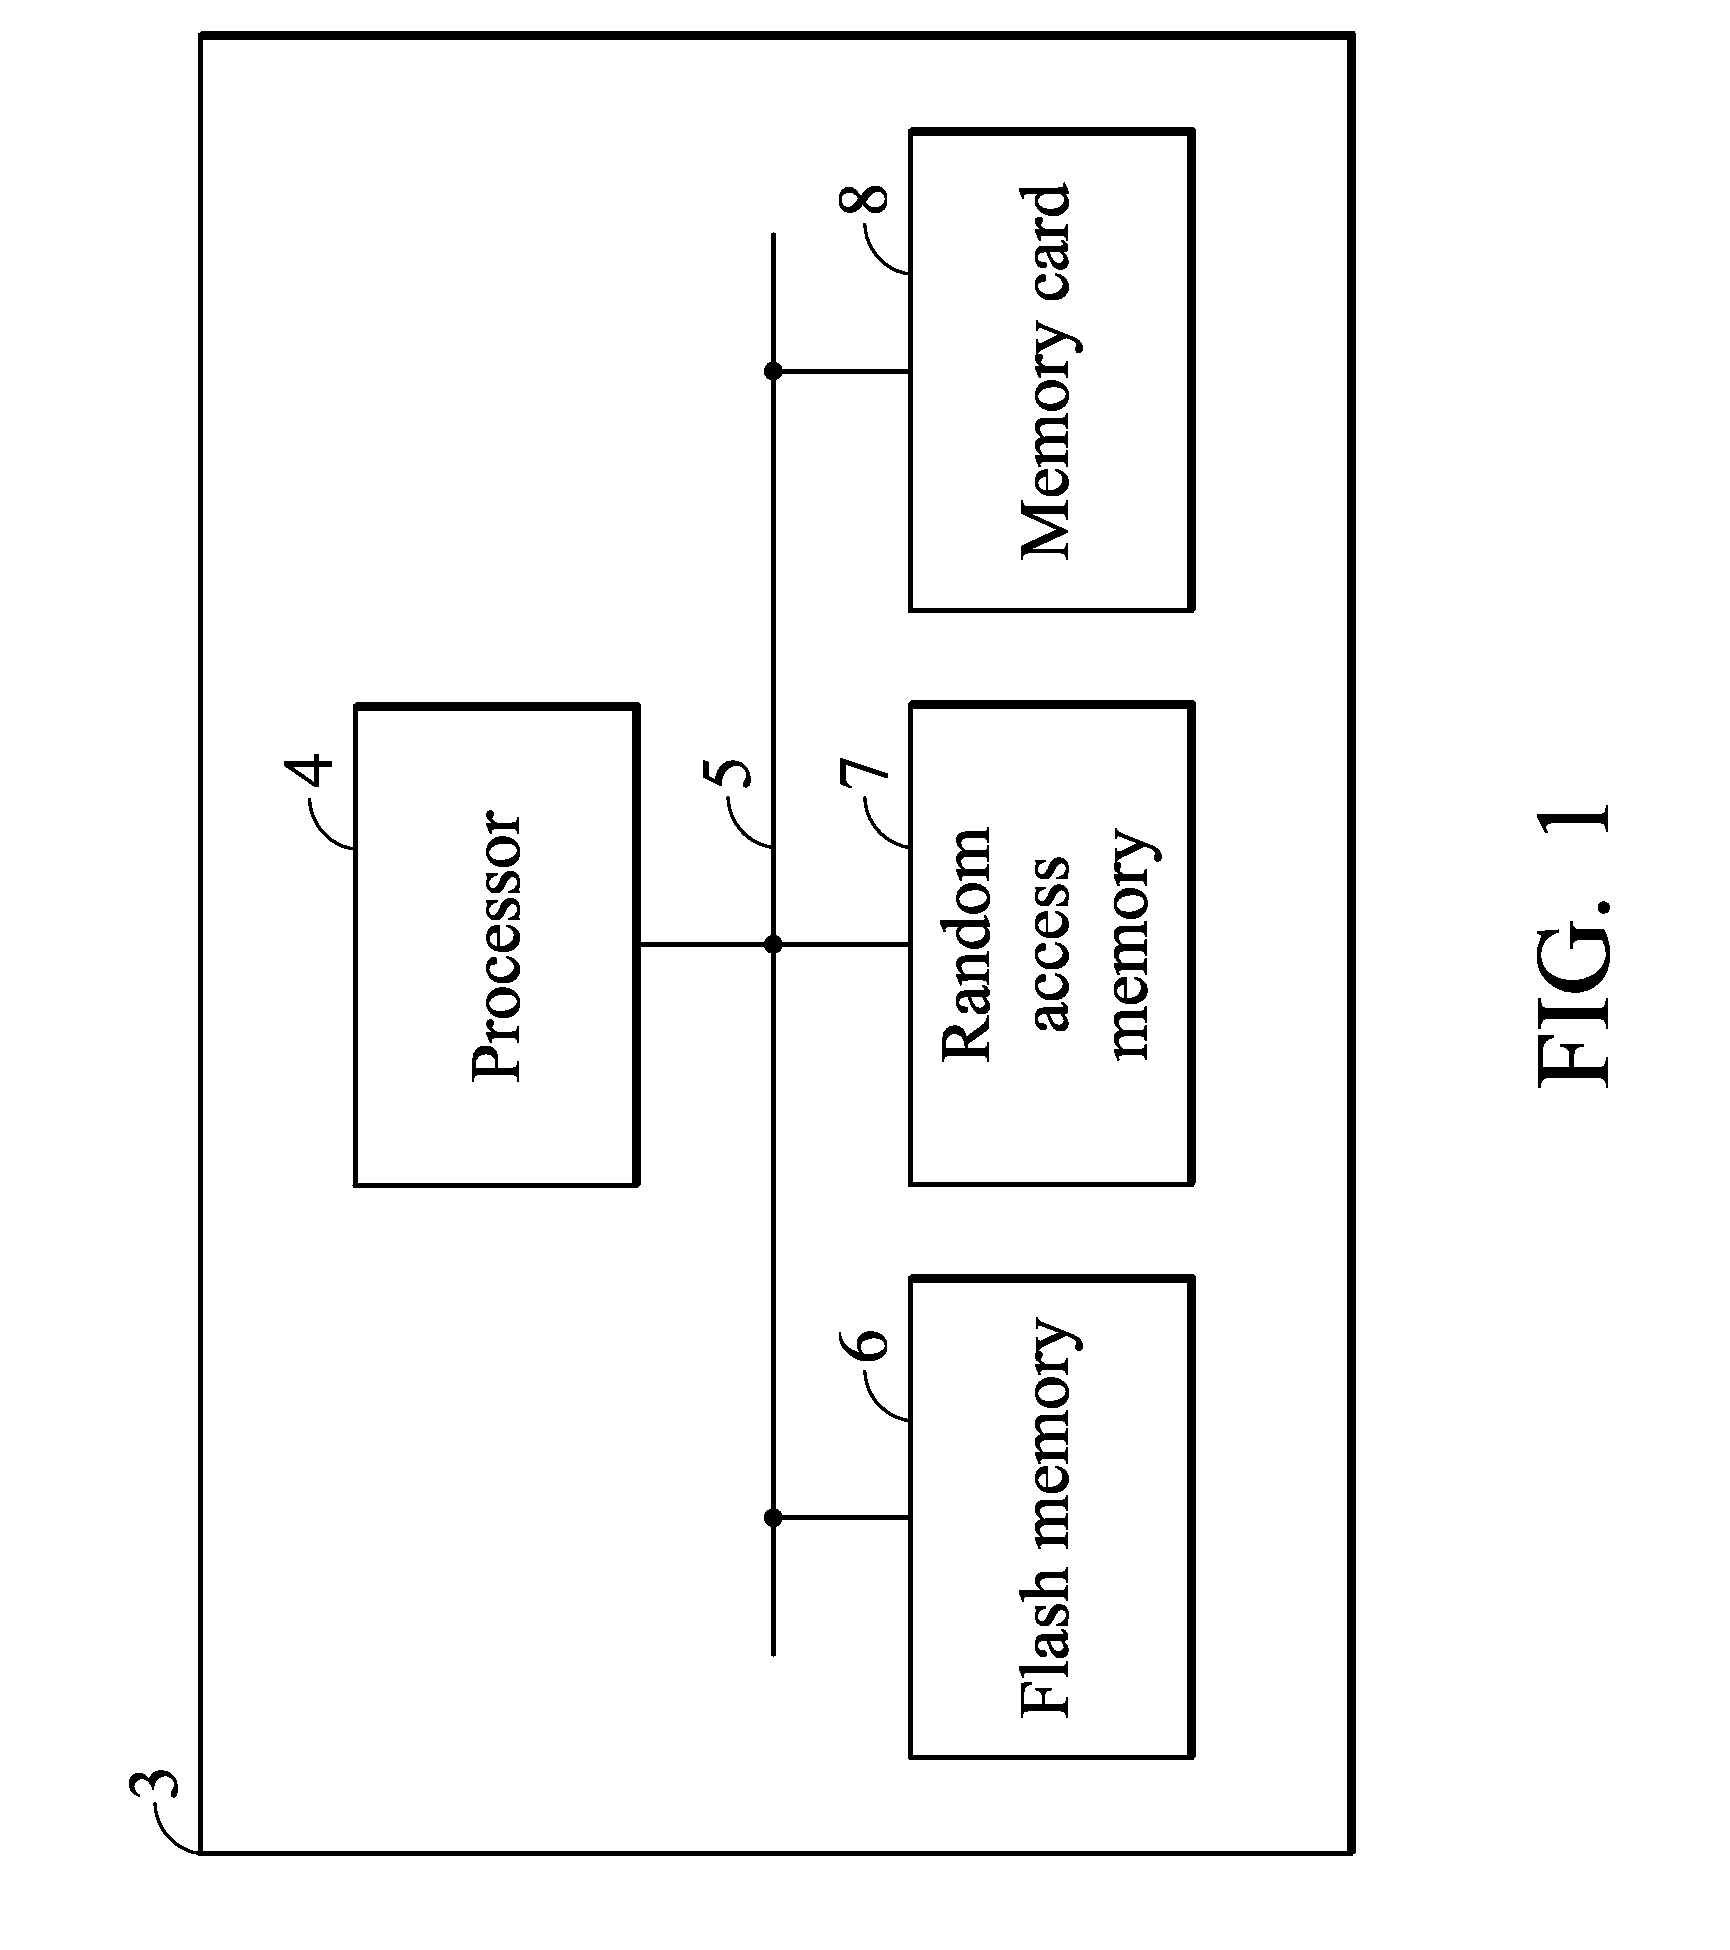 Electronic devices and operation methods of a file system